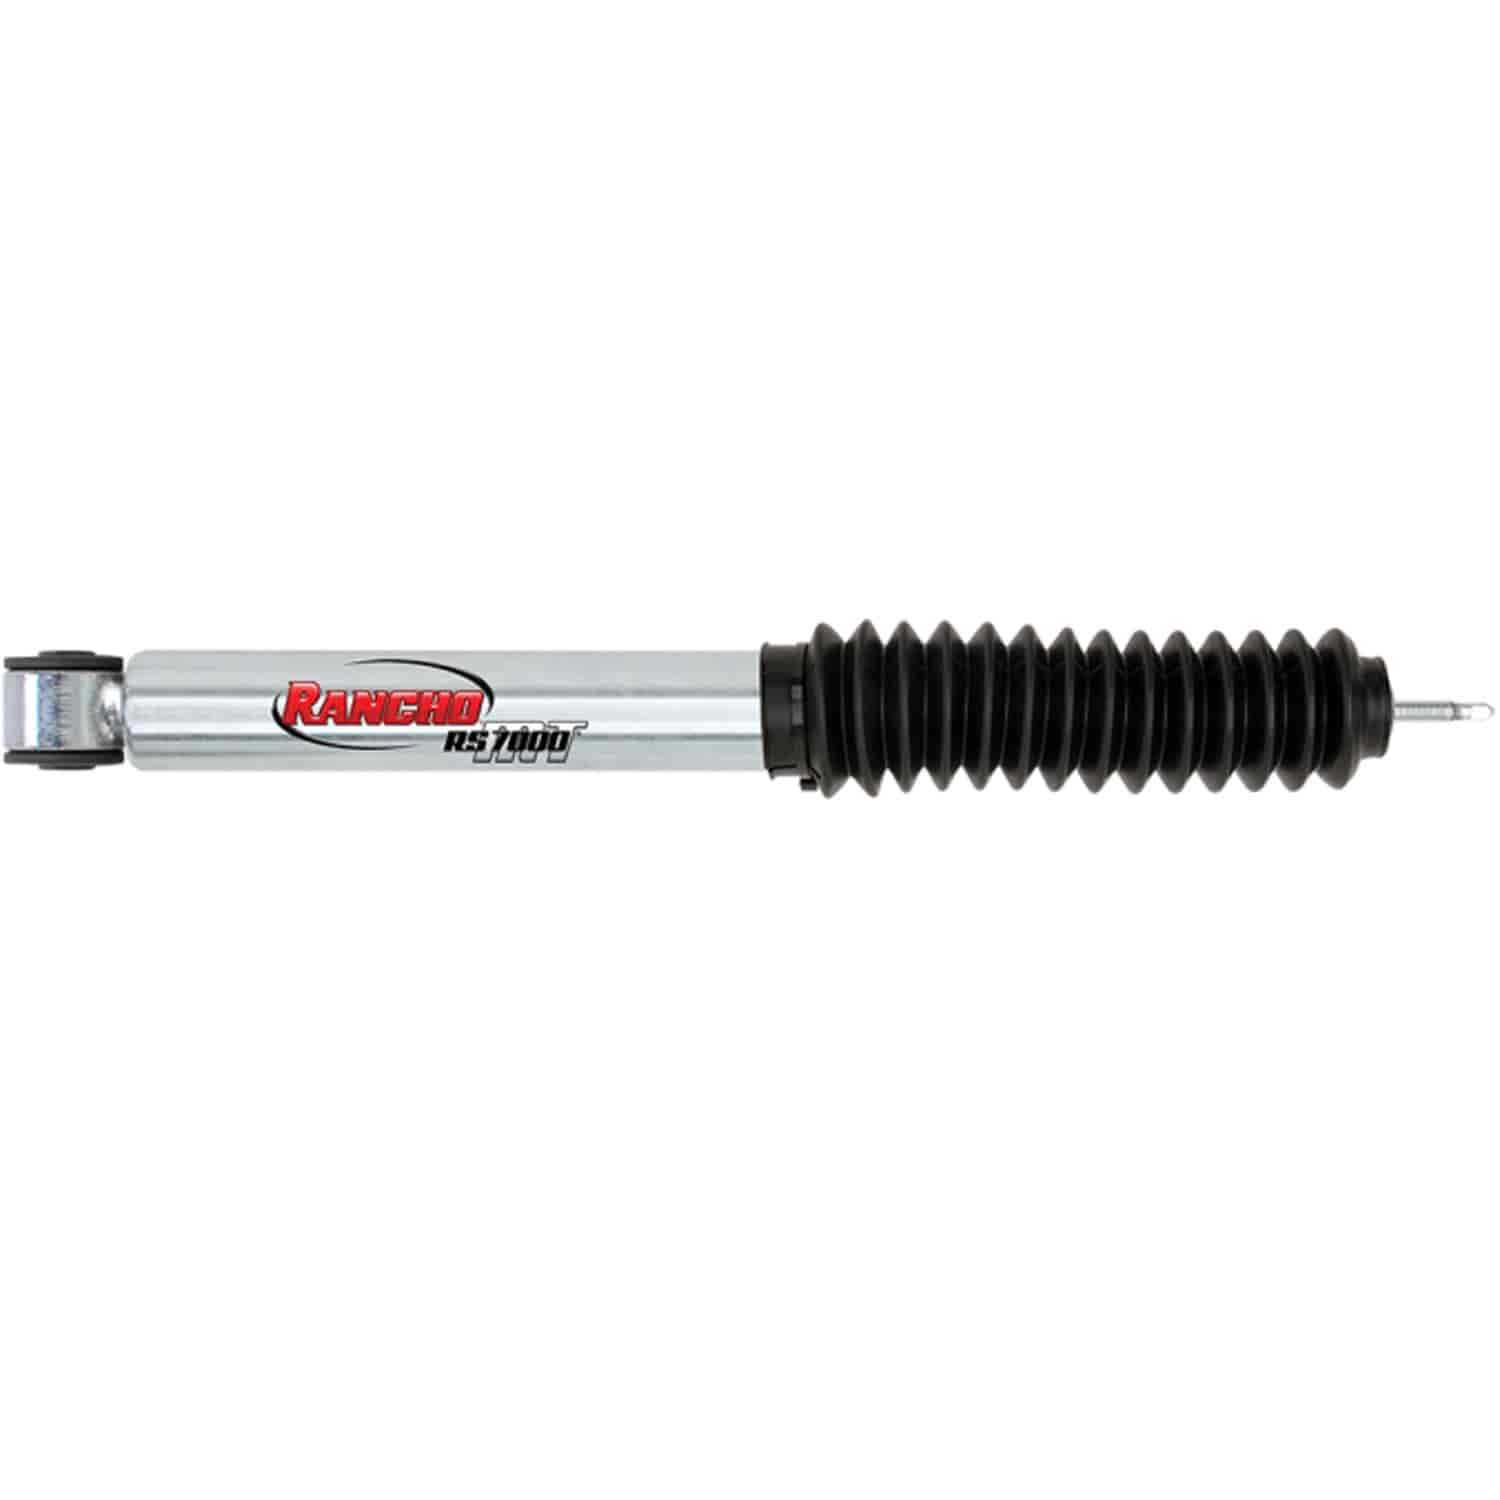 RS7000MT Front Shock Fits Chevy Avalanche 2500 and GM HD Pickups